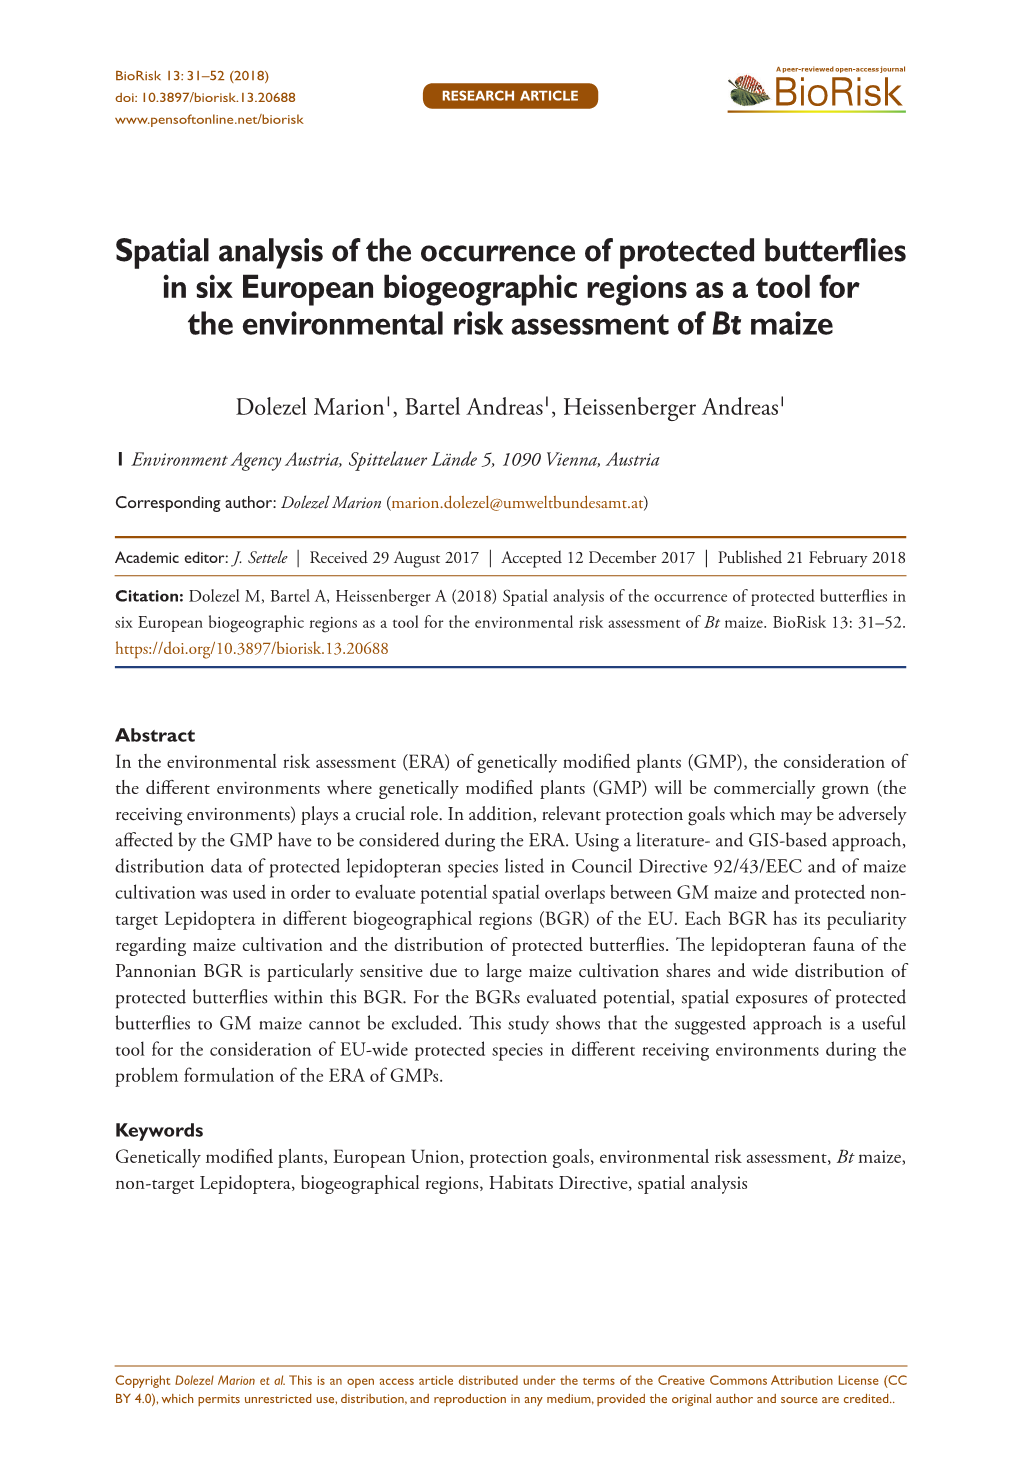 Spatial Analysis of the Occurrence of Protected Butterflies in Six European Biogeographic Regions As a Tool for the Environmental Risk Assessment of Bt Maize